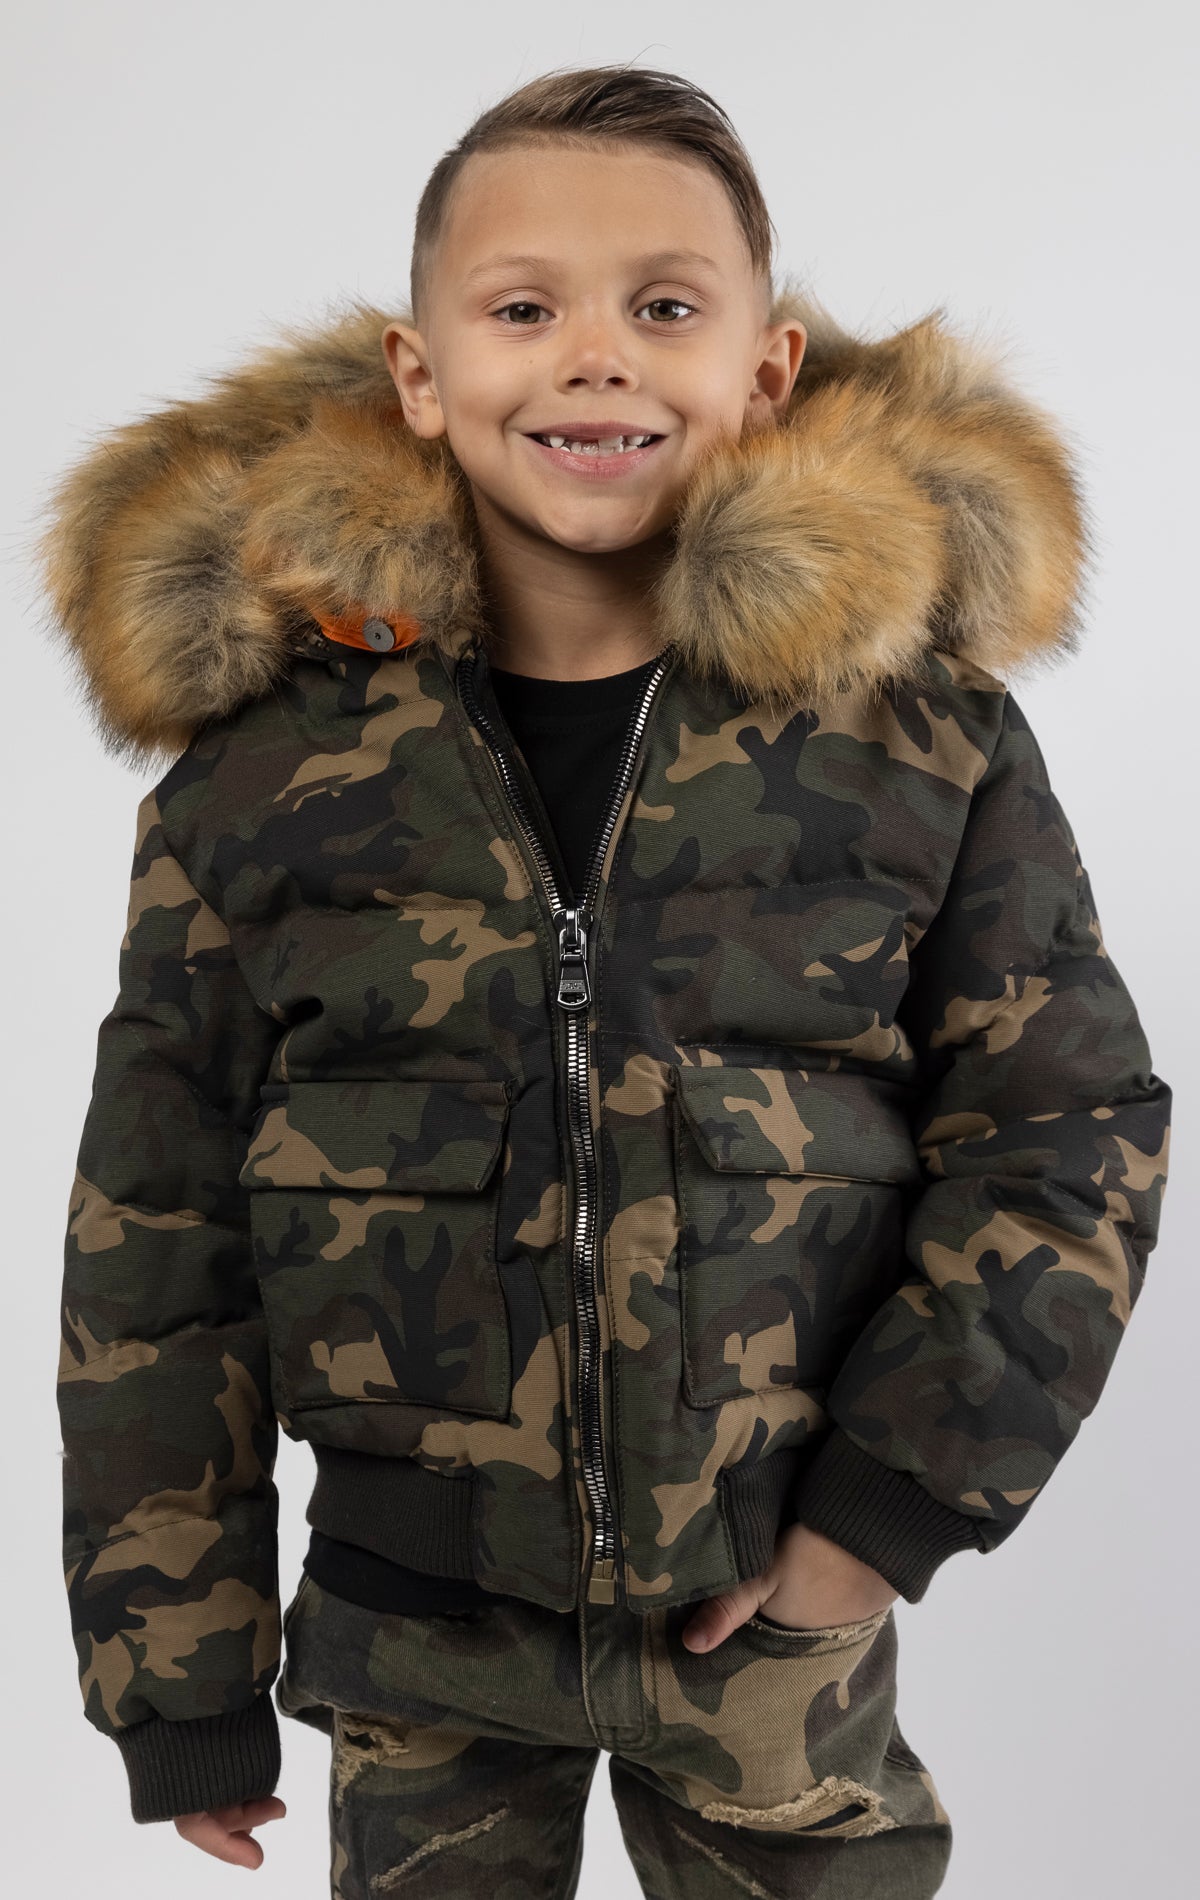 Full zip bomber jacket silhouette, with quilted padding and dense insulation for extreme warmth. Made with 100% polyester lining and featuring a removable faux jackal fur collar and hood. Available in woodland and black camo.